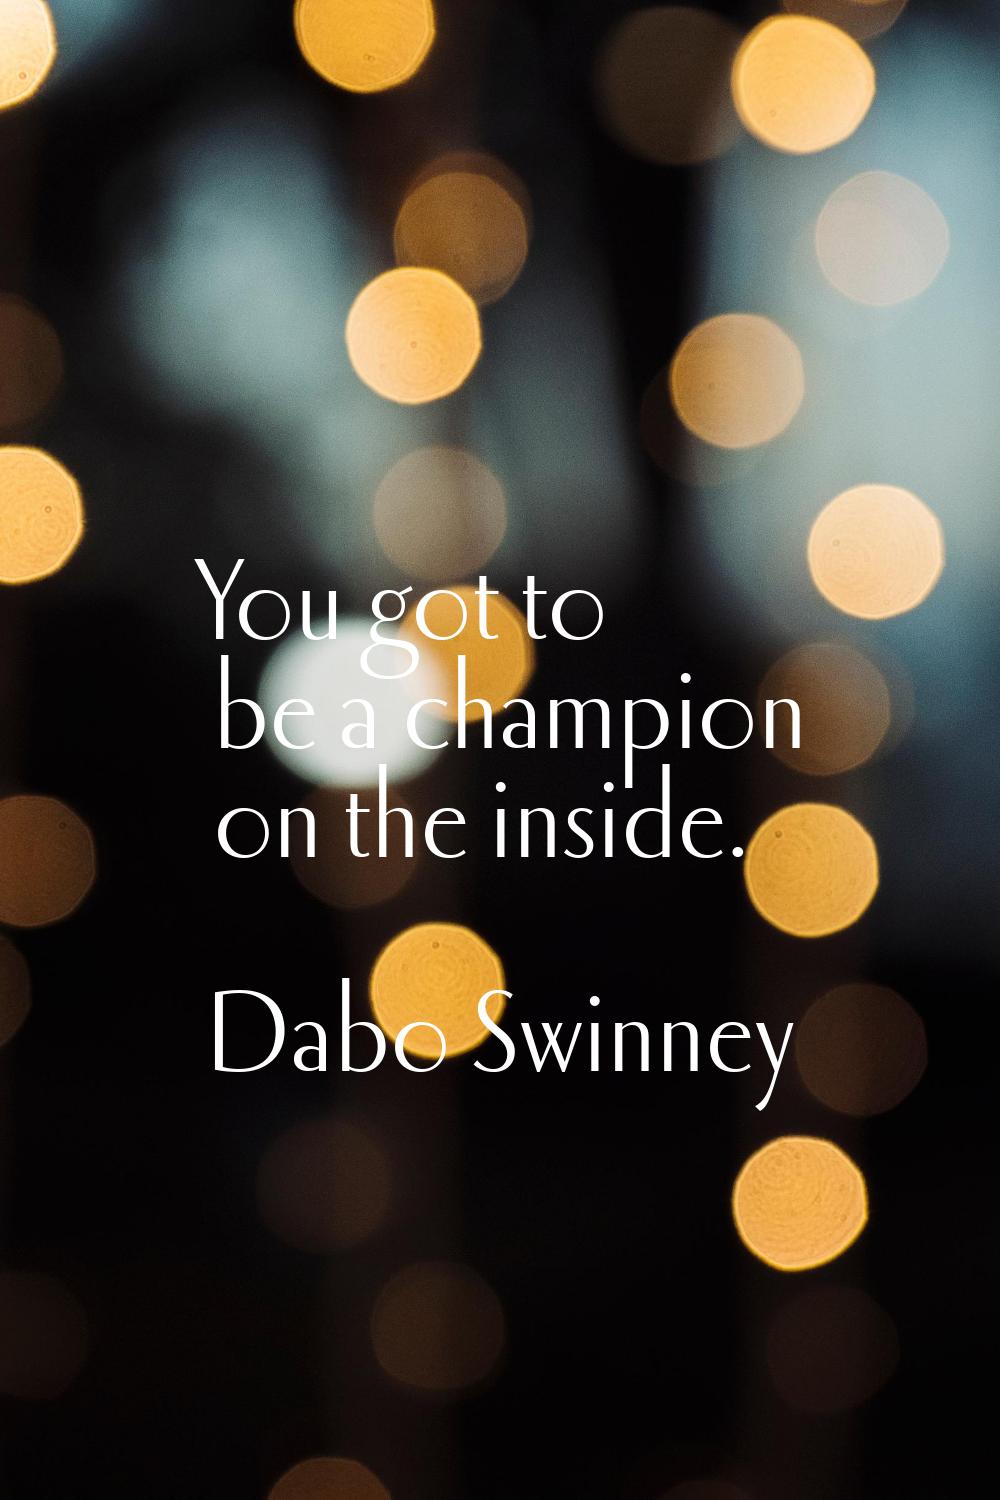 You got to be a champion on the inside.